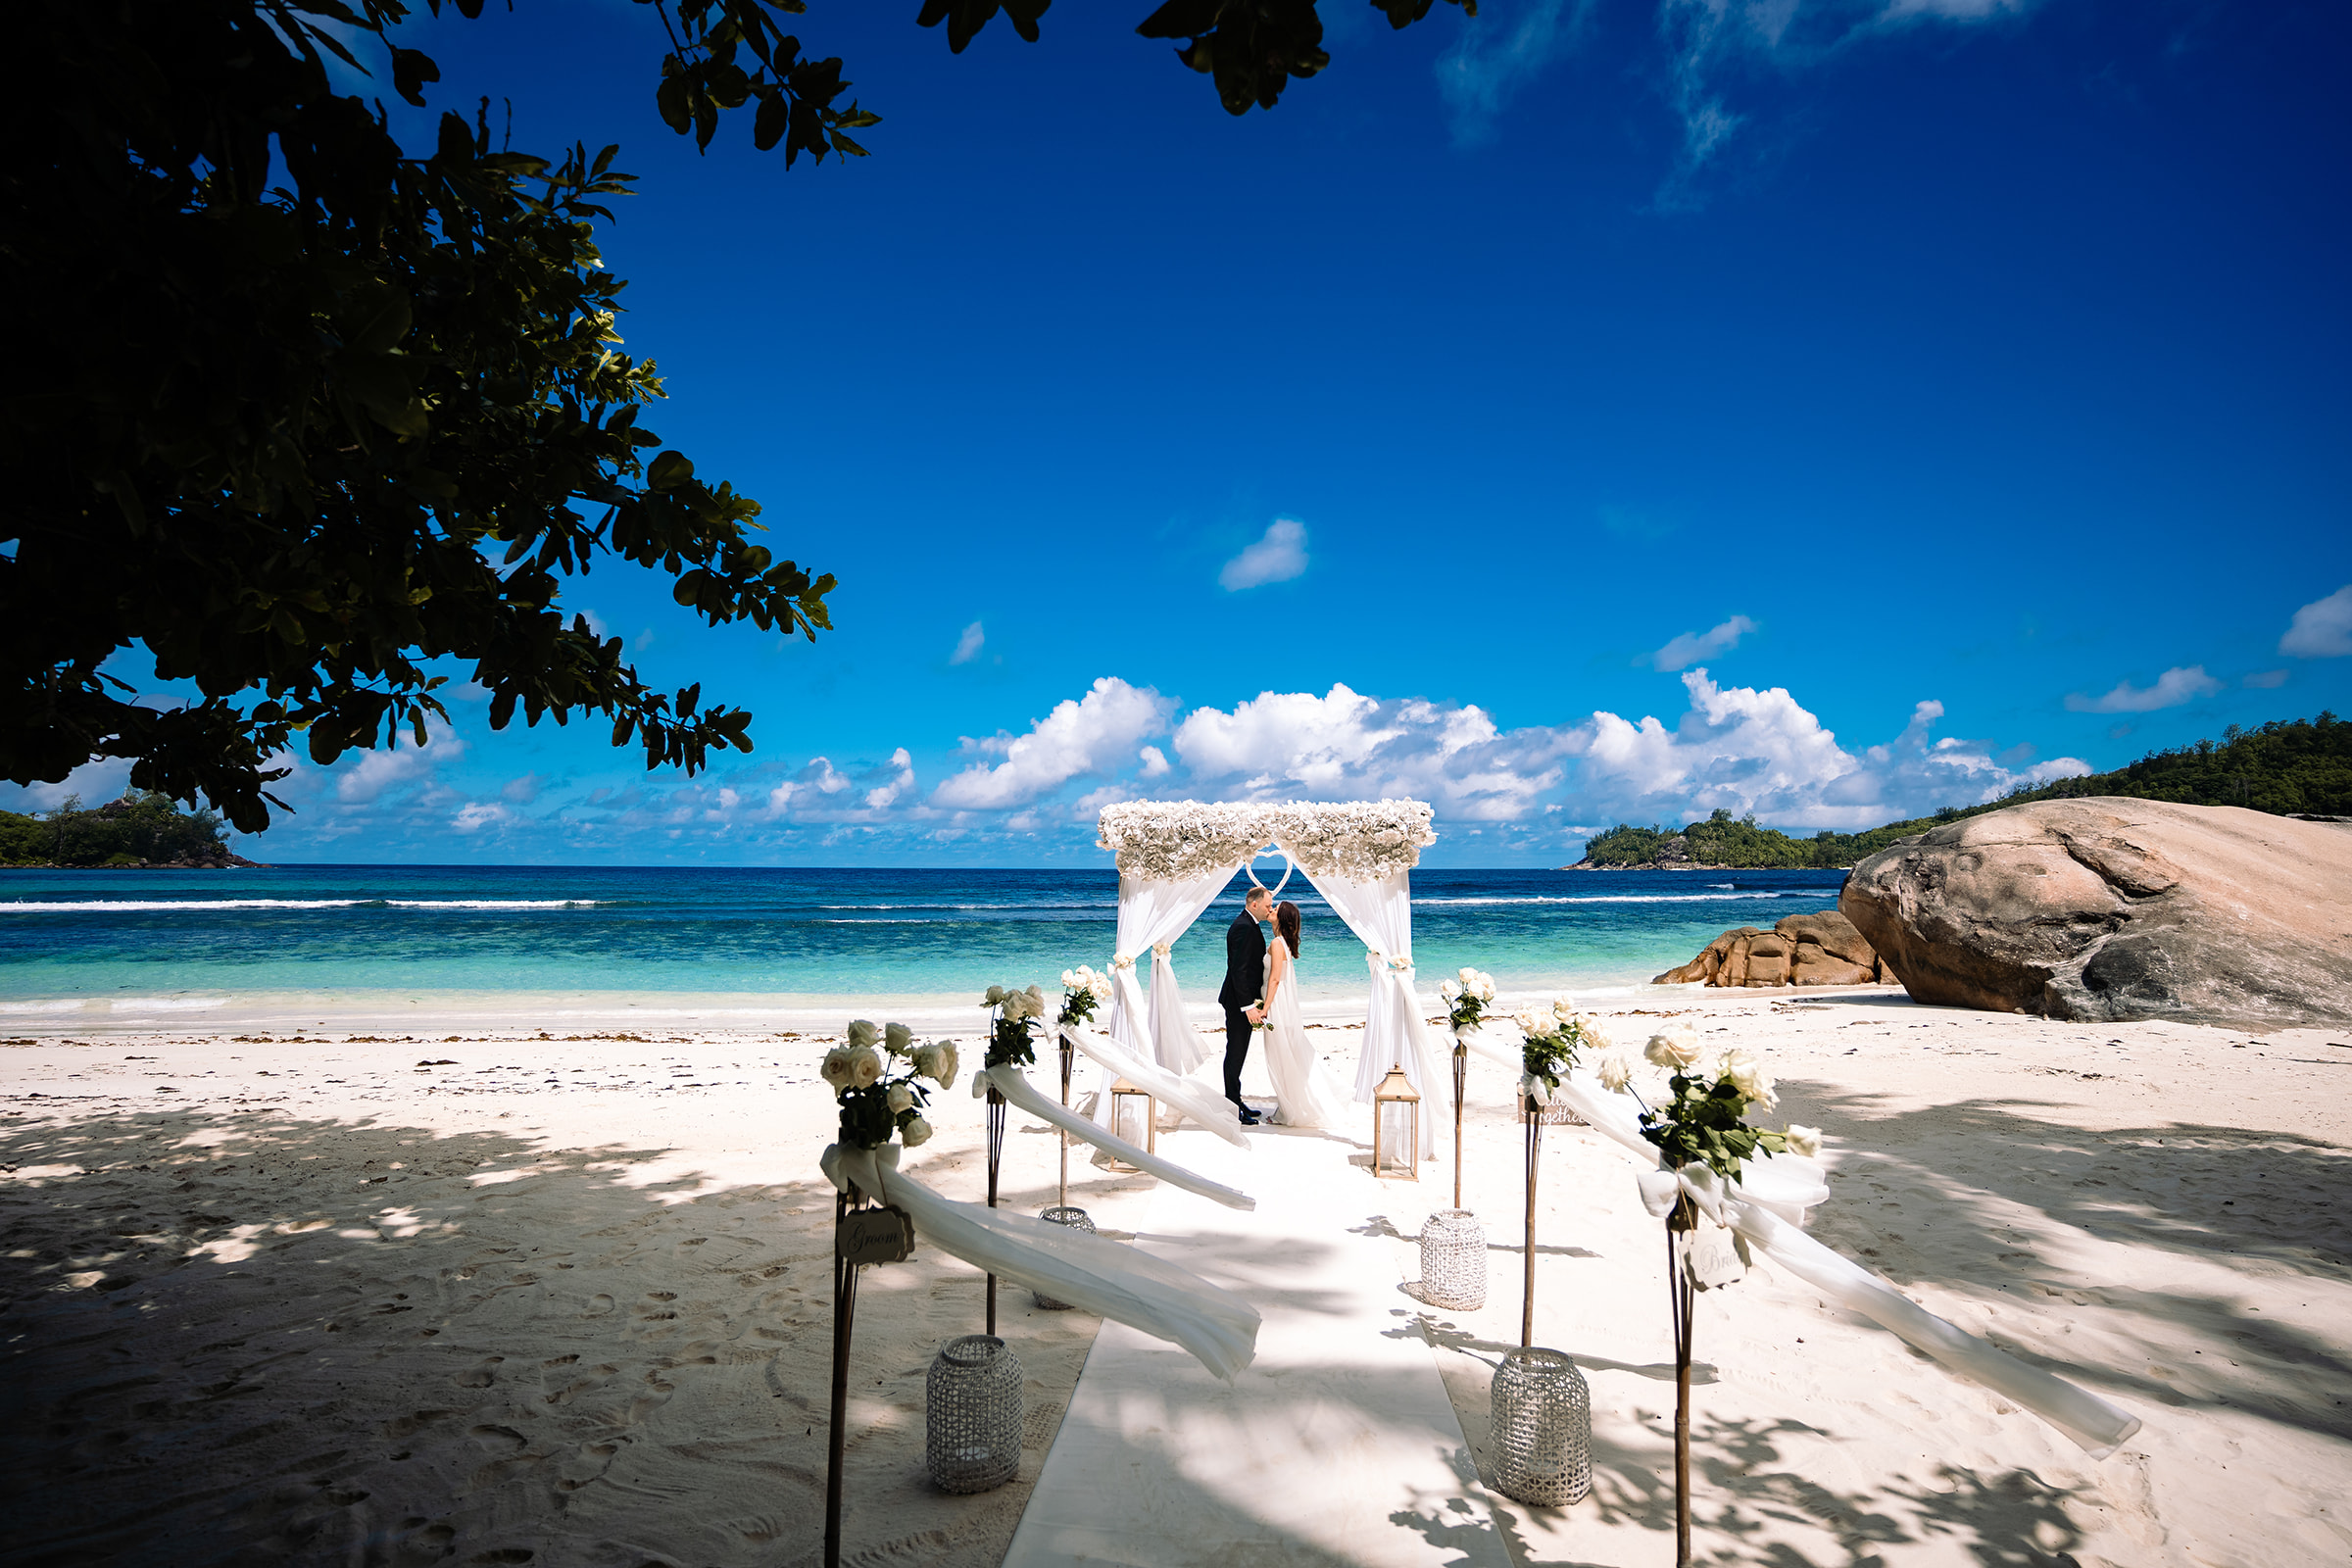 Photography of an elopement wedding in Seychelles on Baie Lazare Beach